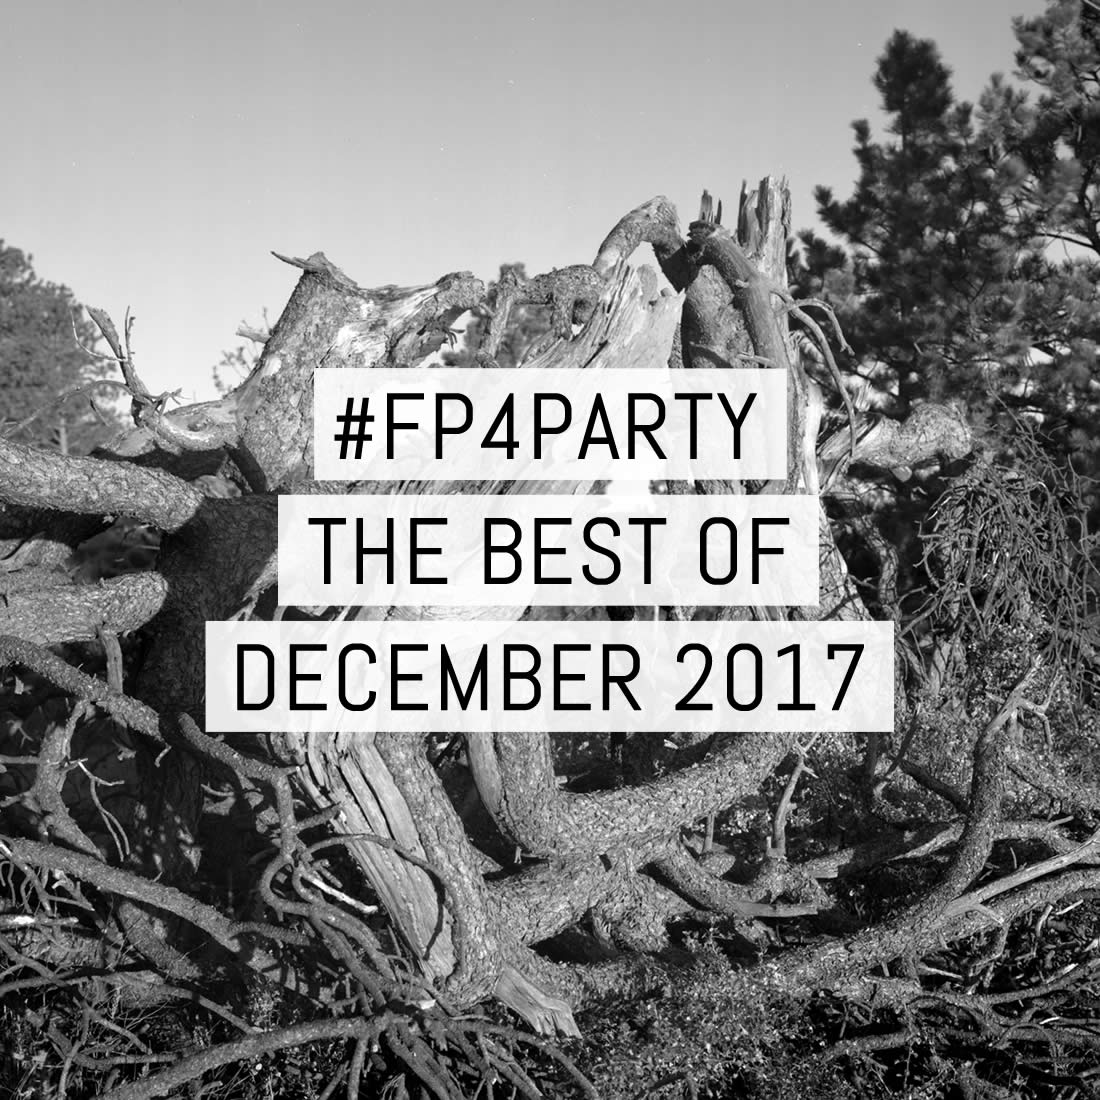 The best of #FP4party December 2017